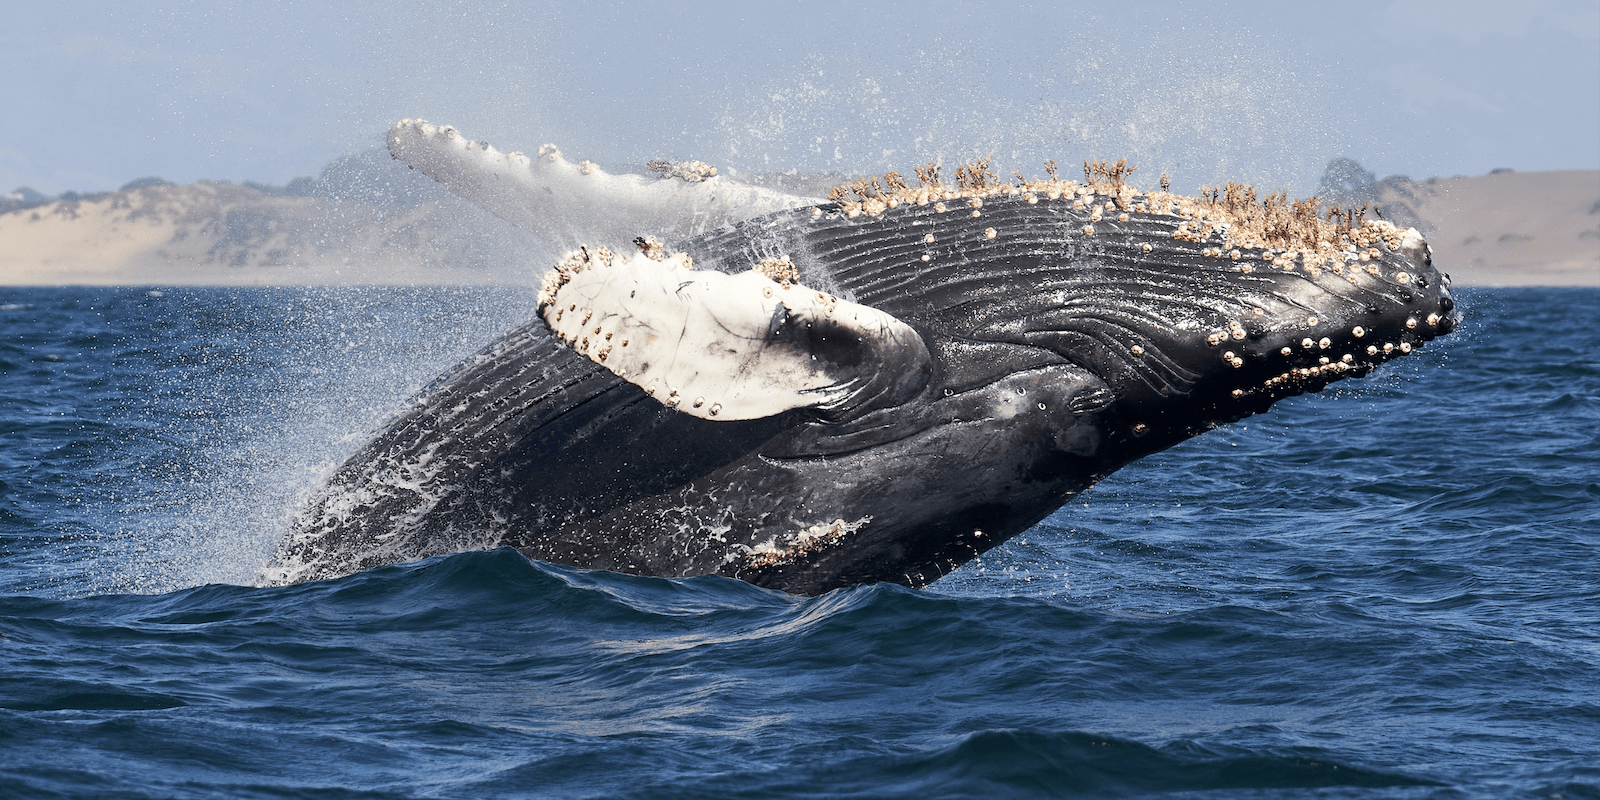 do_whale watching_humpback_800x400_mike doherty